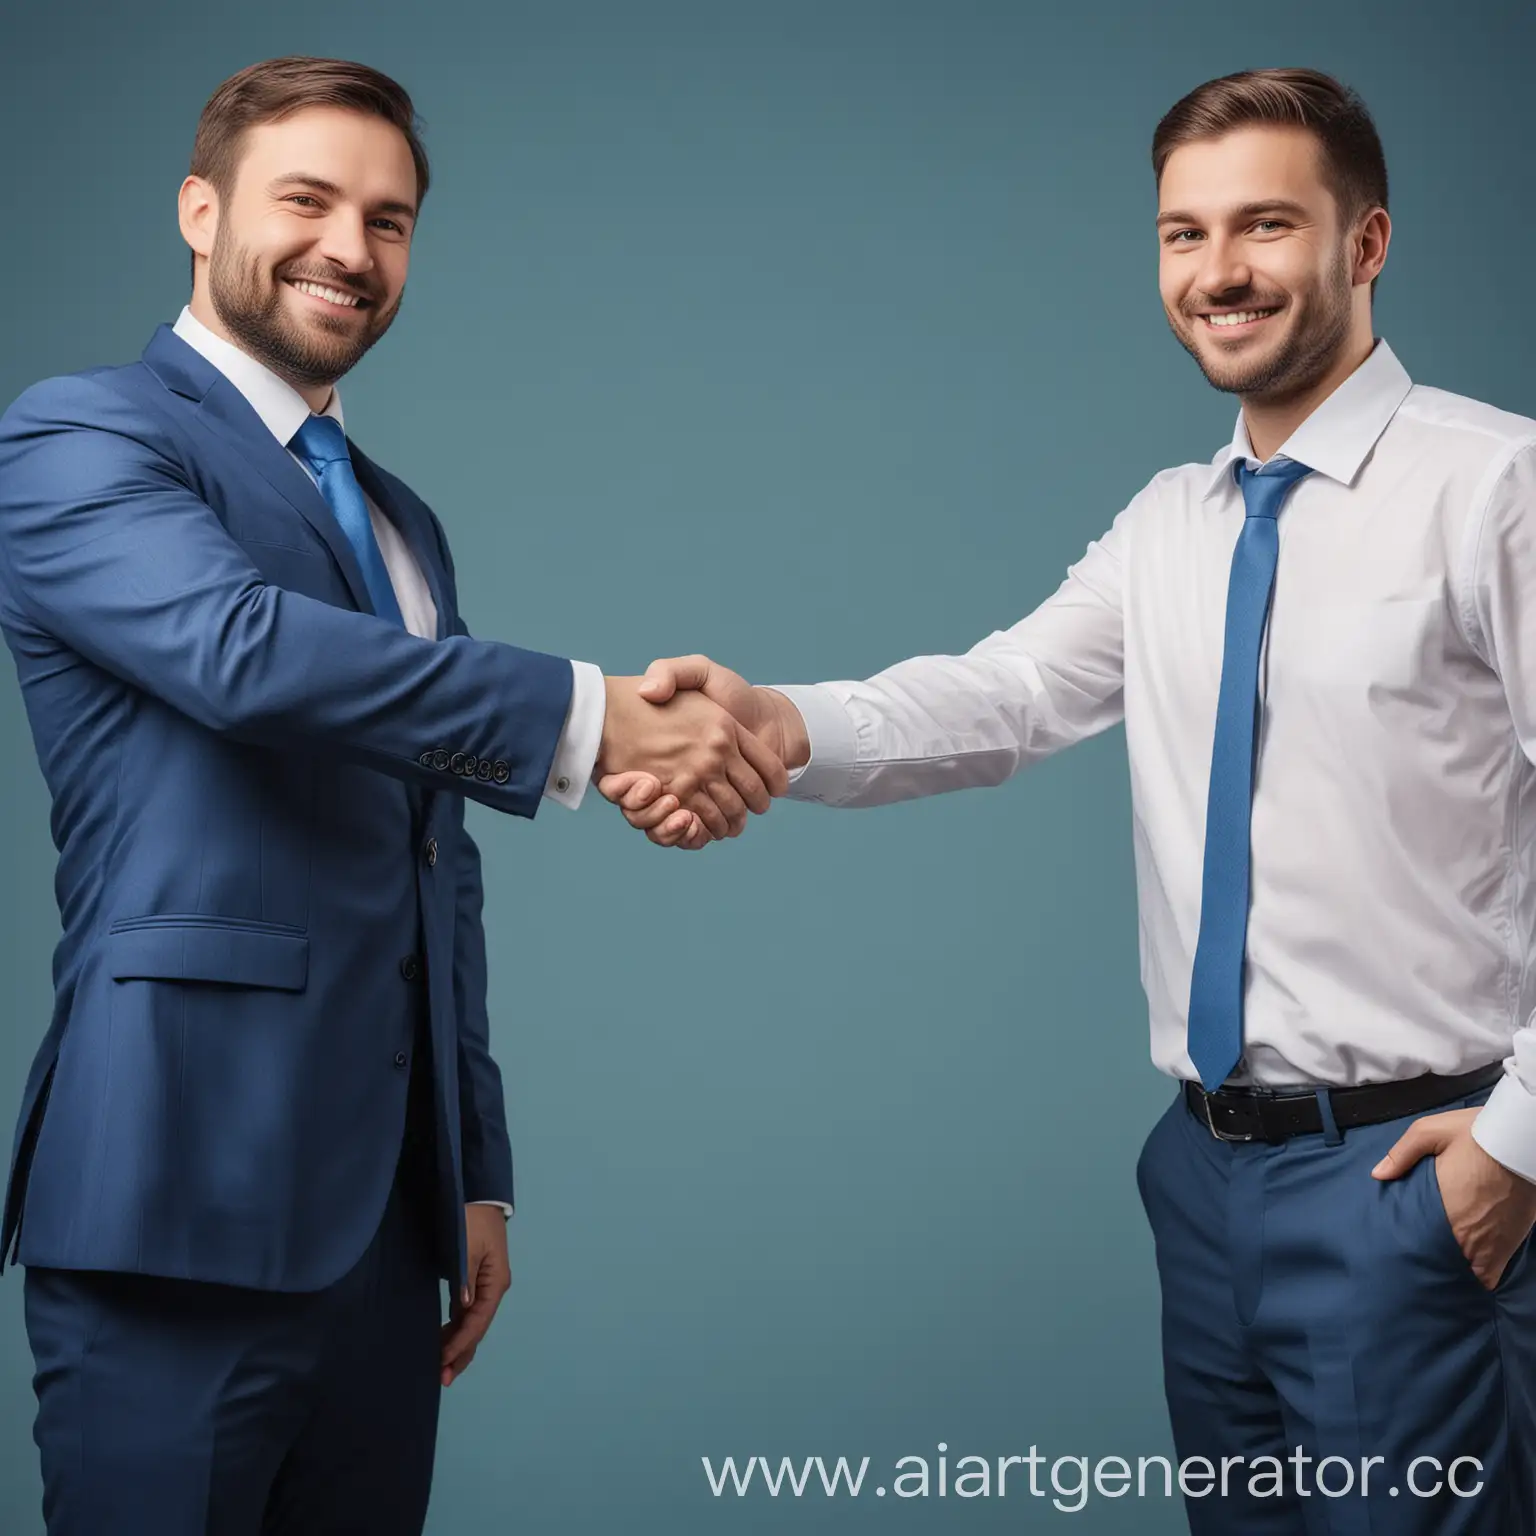 Businessmen-Shaking-Hands-with-Confidence-and-Smiles